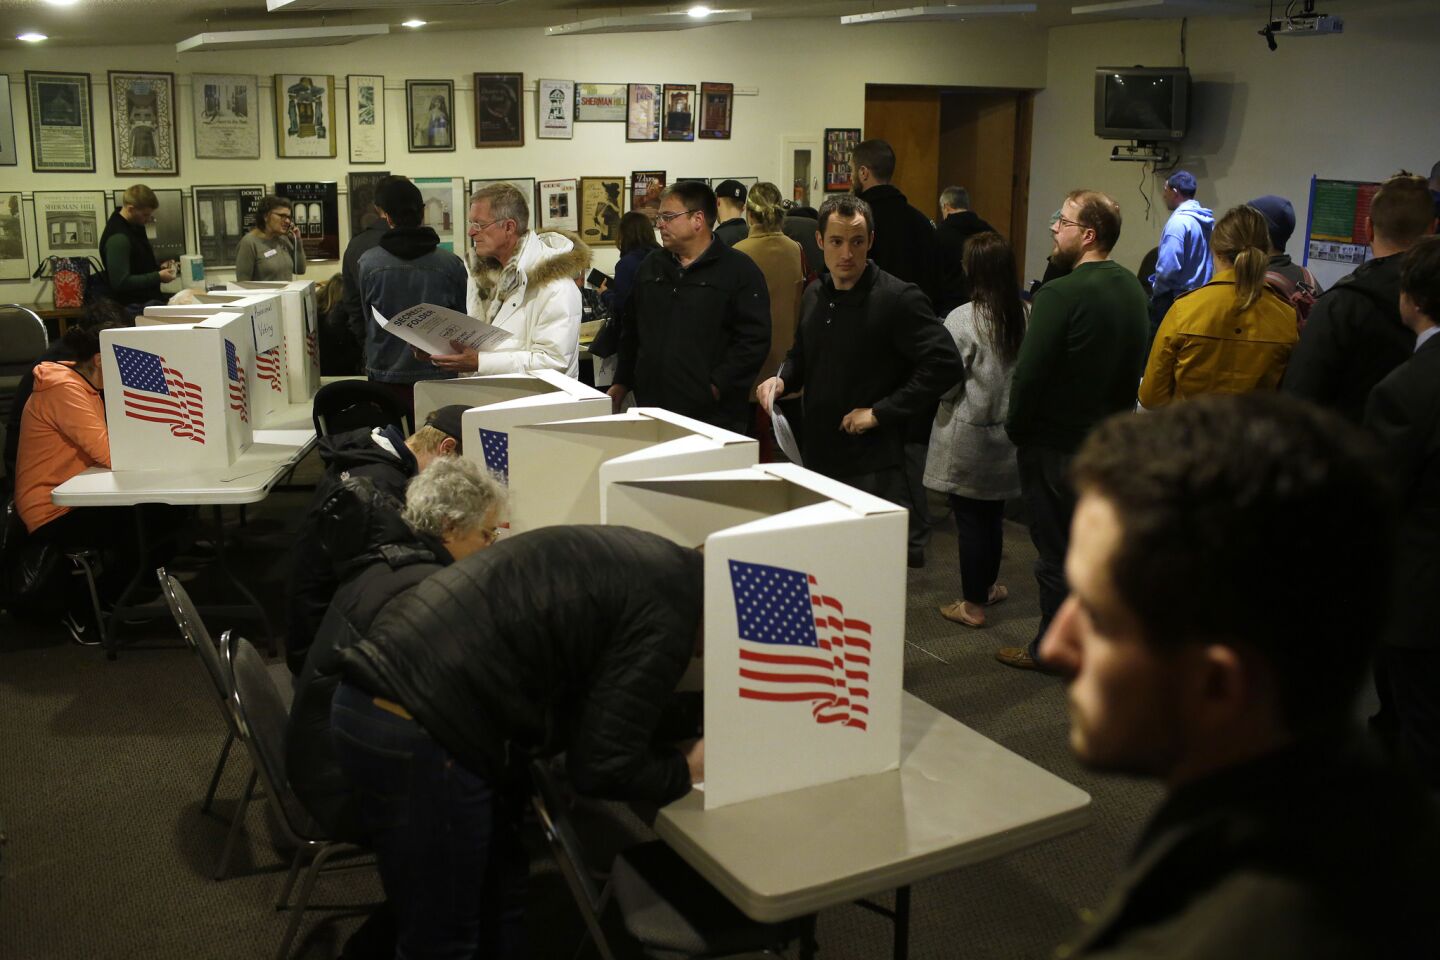 Voters fill out their ballots at a polling station in Des Moines.